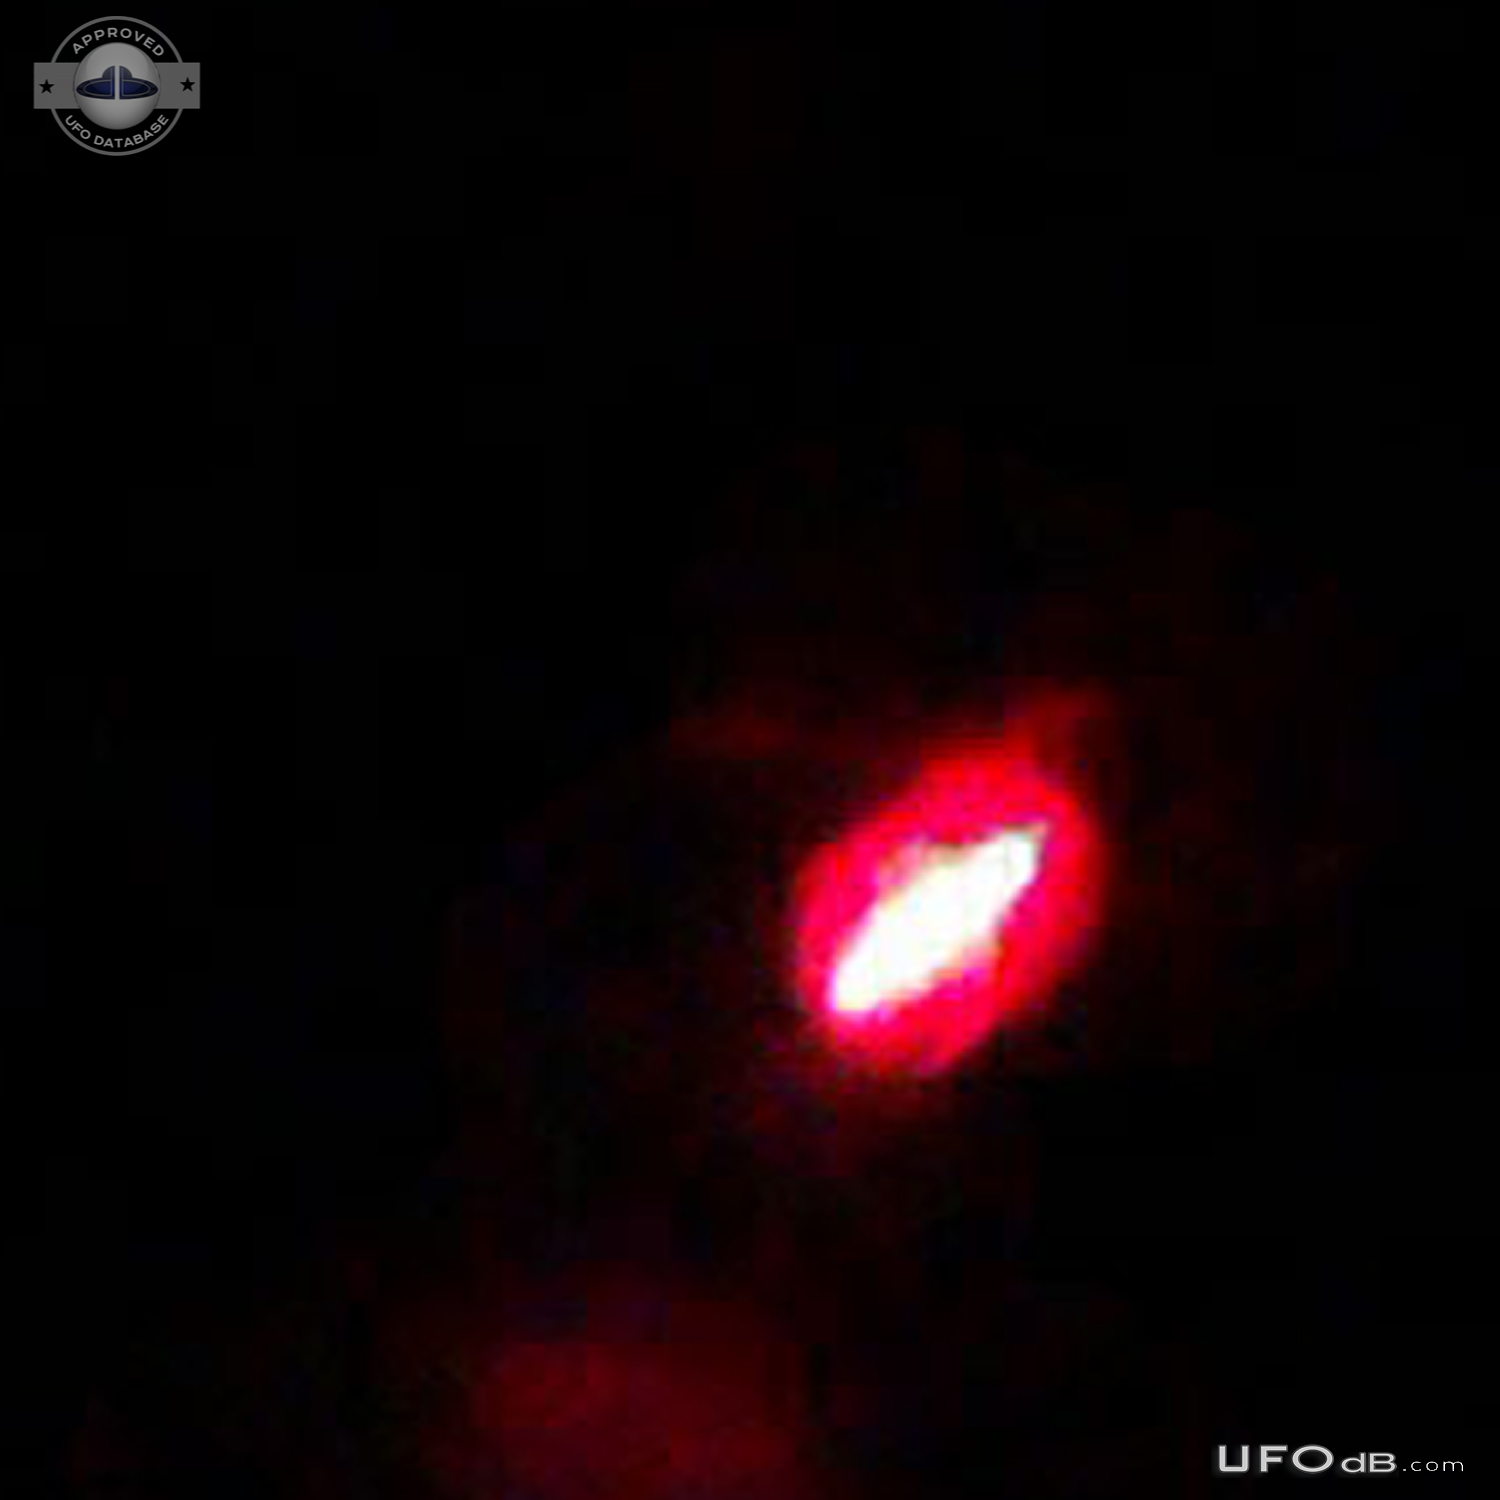 2 Red UFOs illuminating the Clouds - Toddington, Bedfordshire UK 2013 UFO Picture #653-5